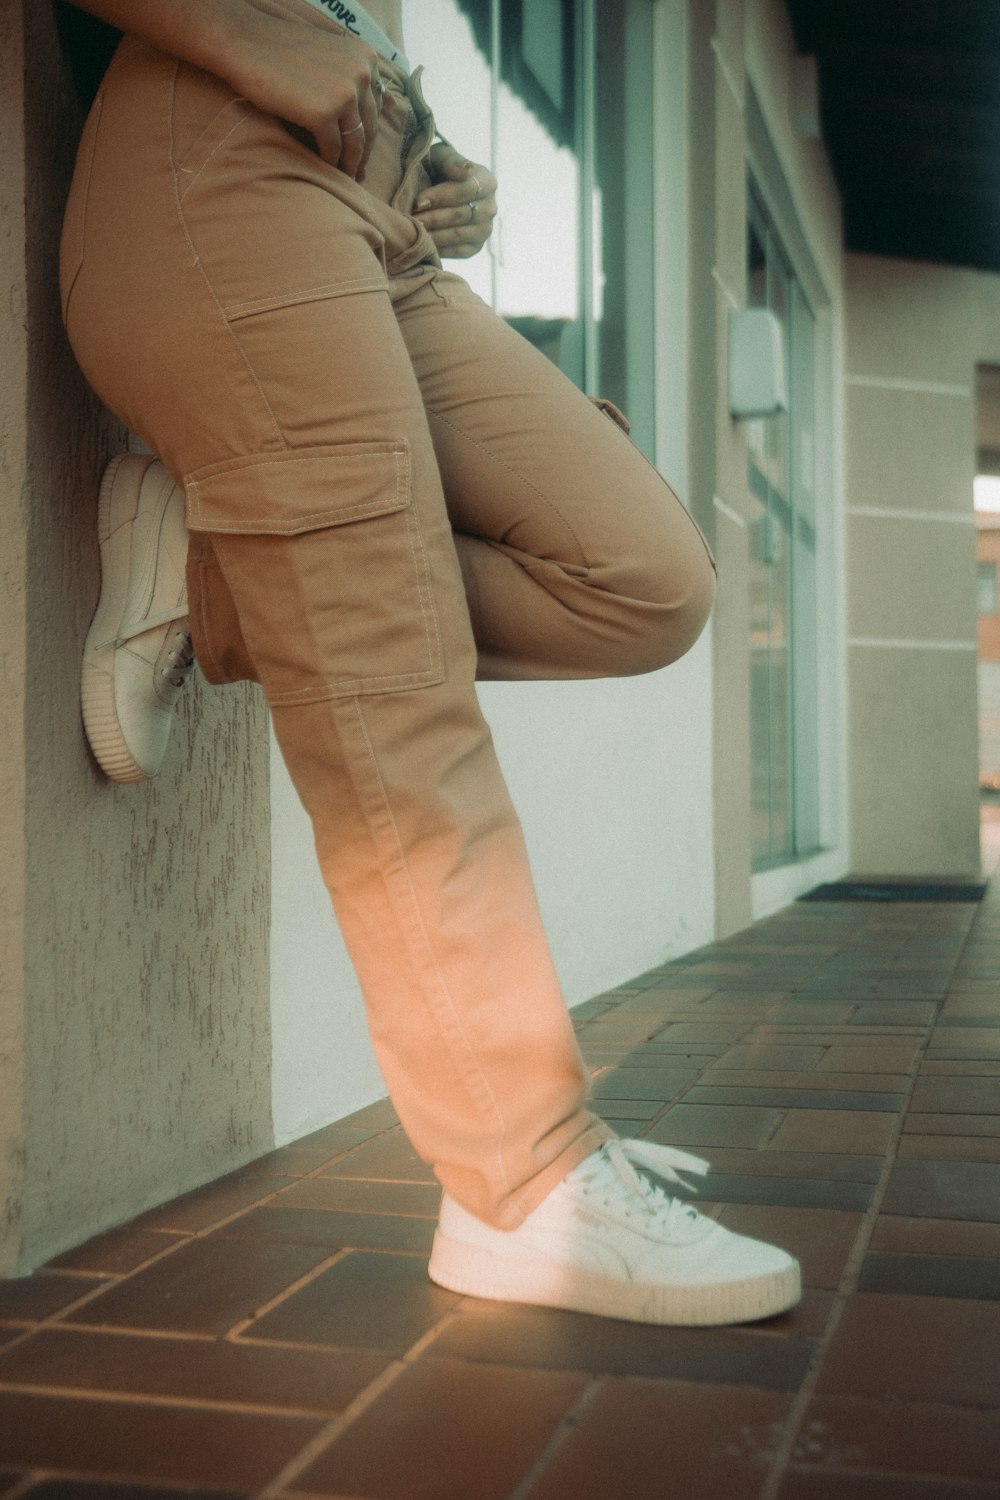 a person leaning against a wall with their legs crossed